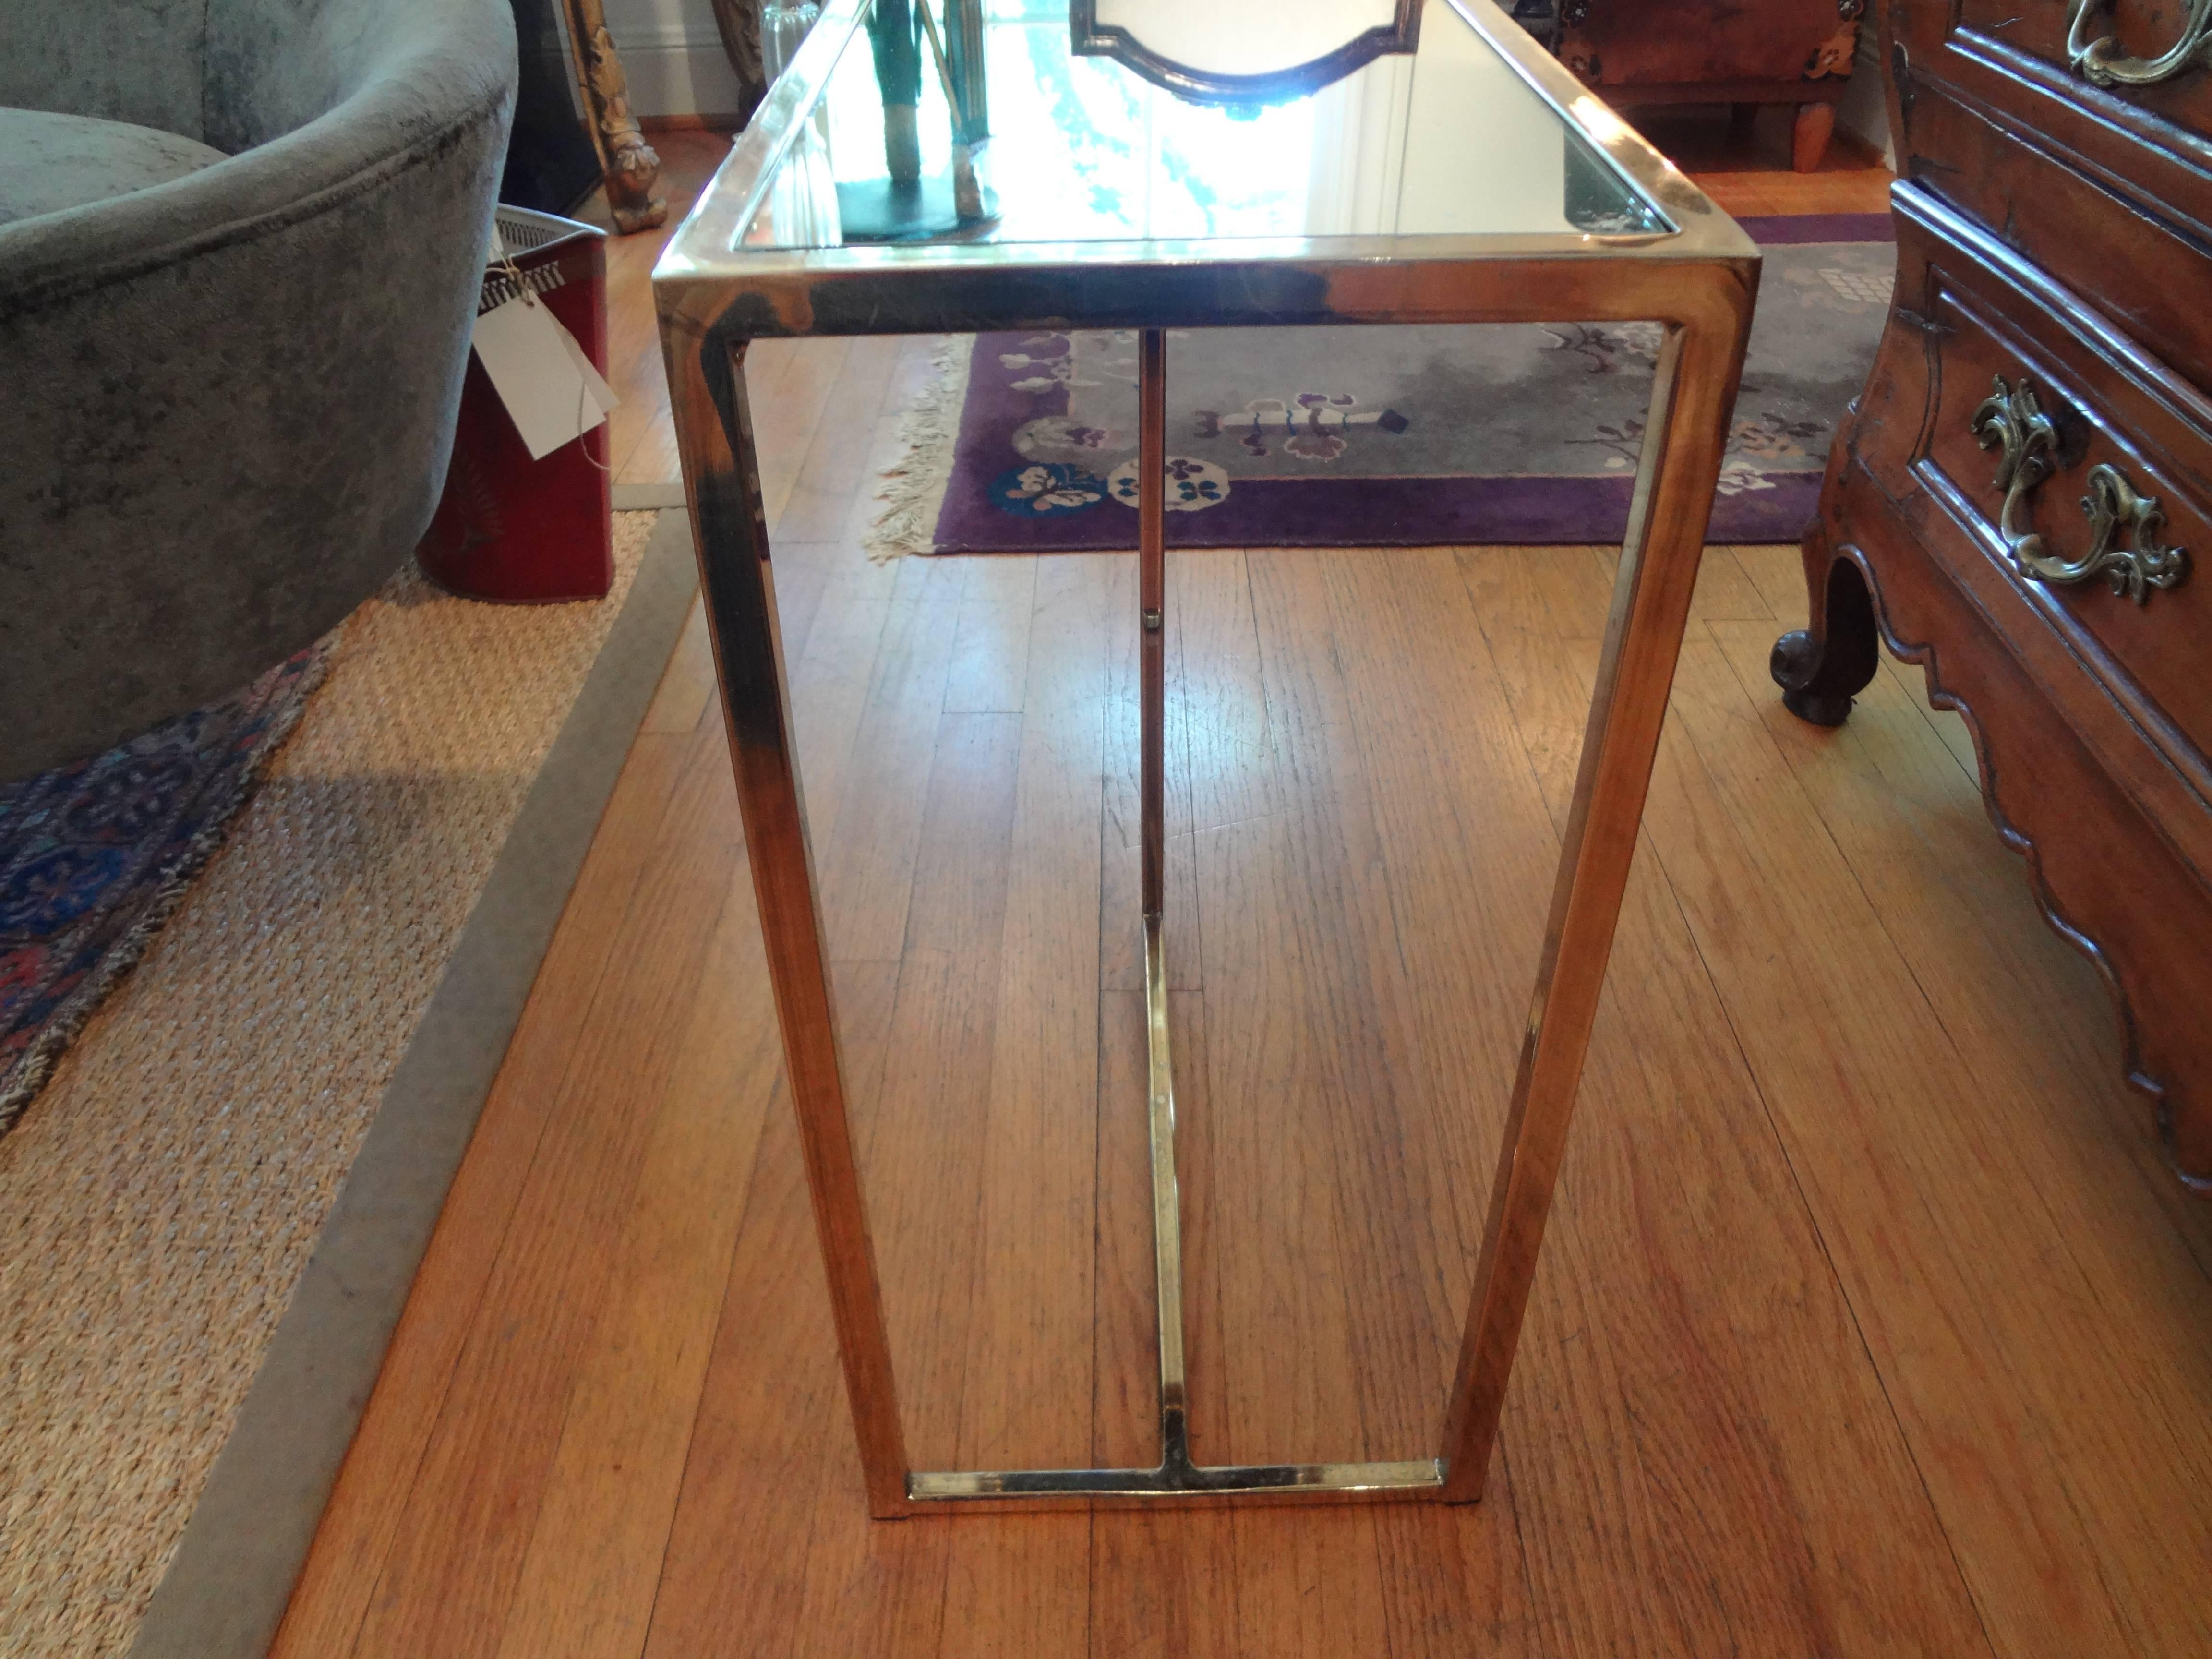 Unusually shaped Mid-Century Modern Milo Baughman inspired brass table with a mirrored top, circa 1970.